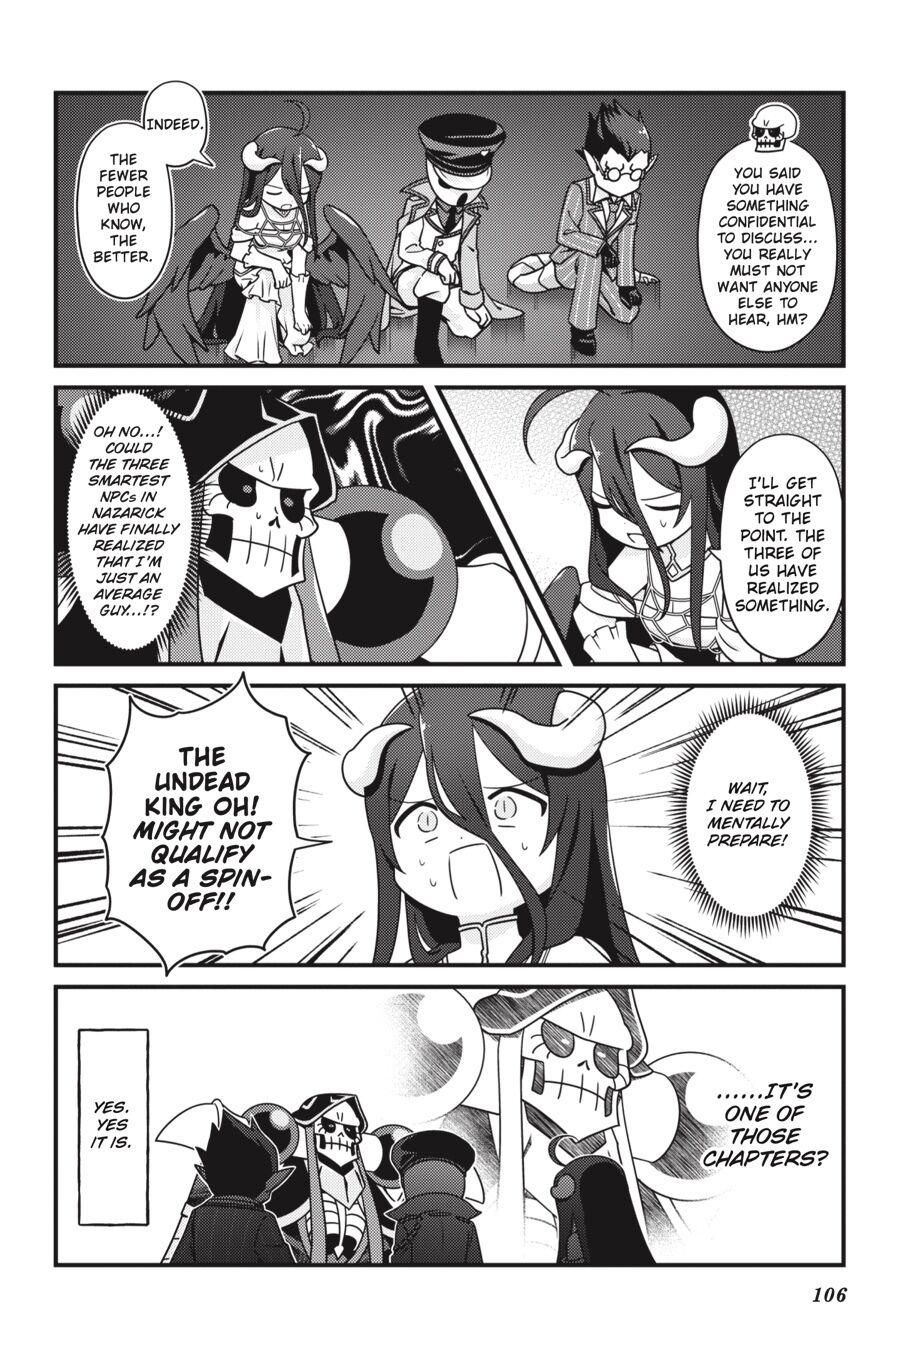 Overlord The Undead King Oh! - chapter 36 - #2